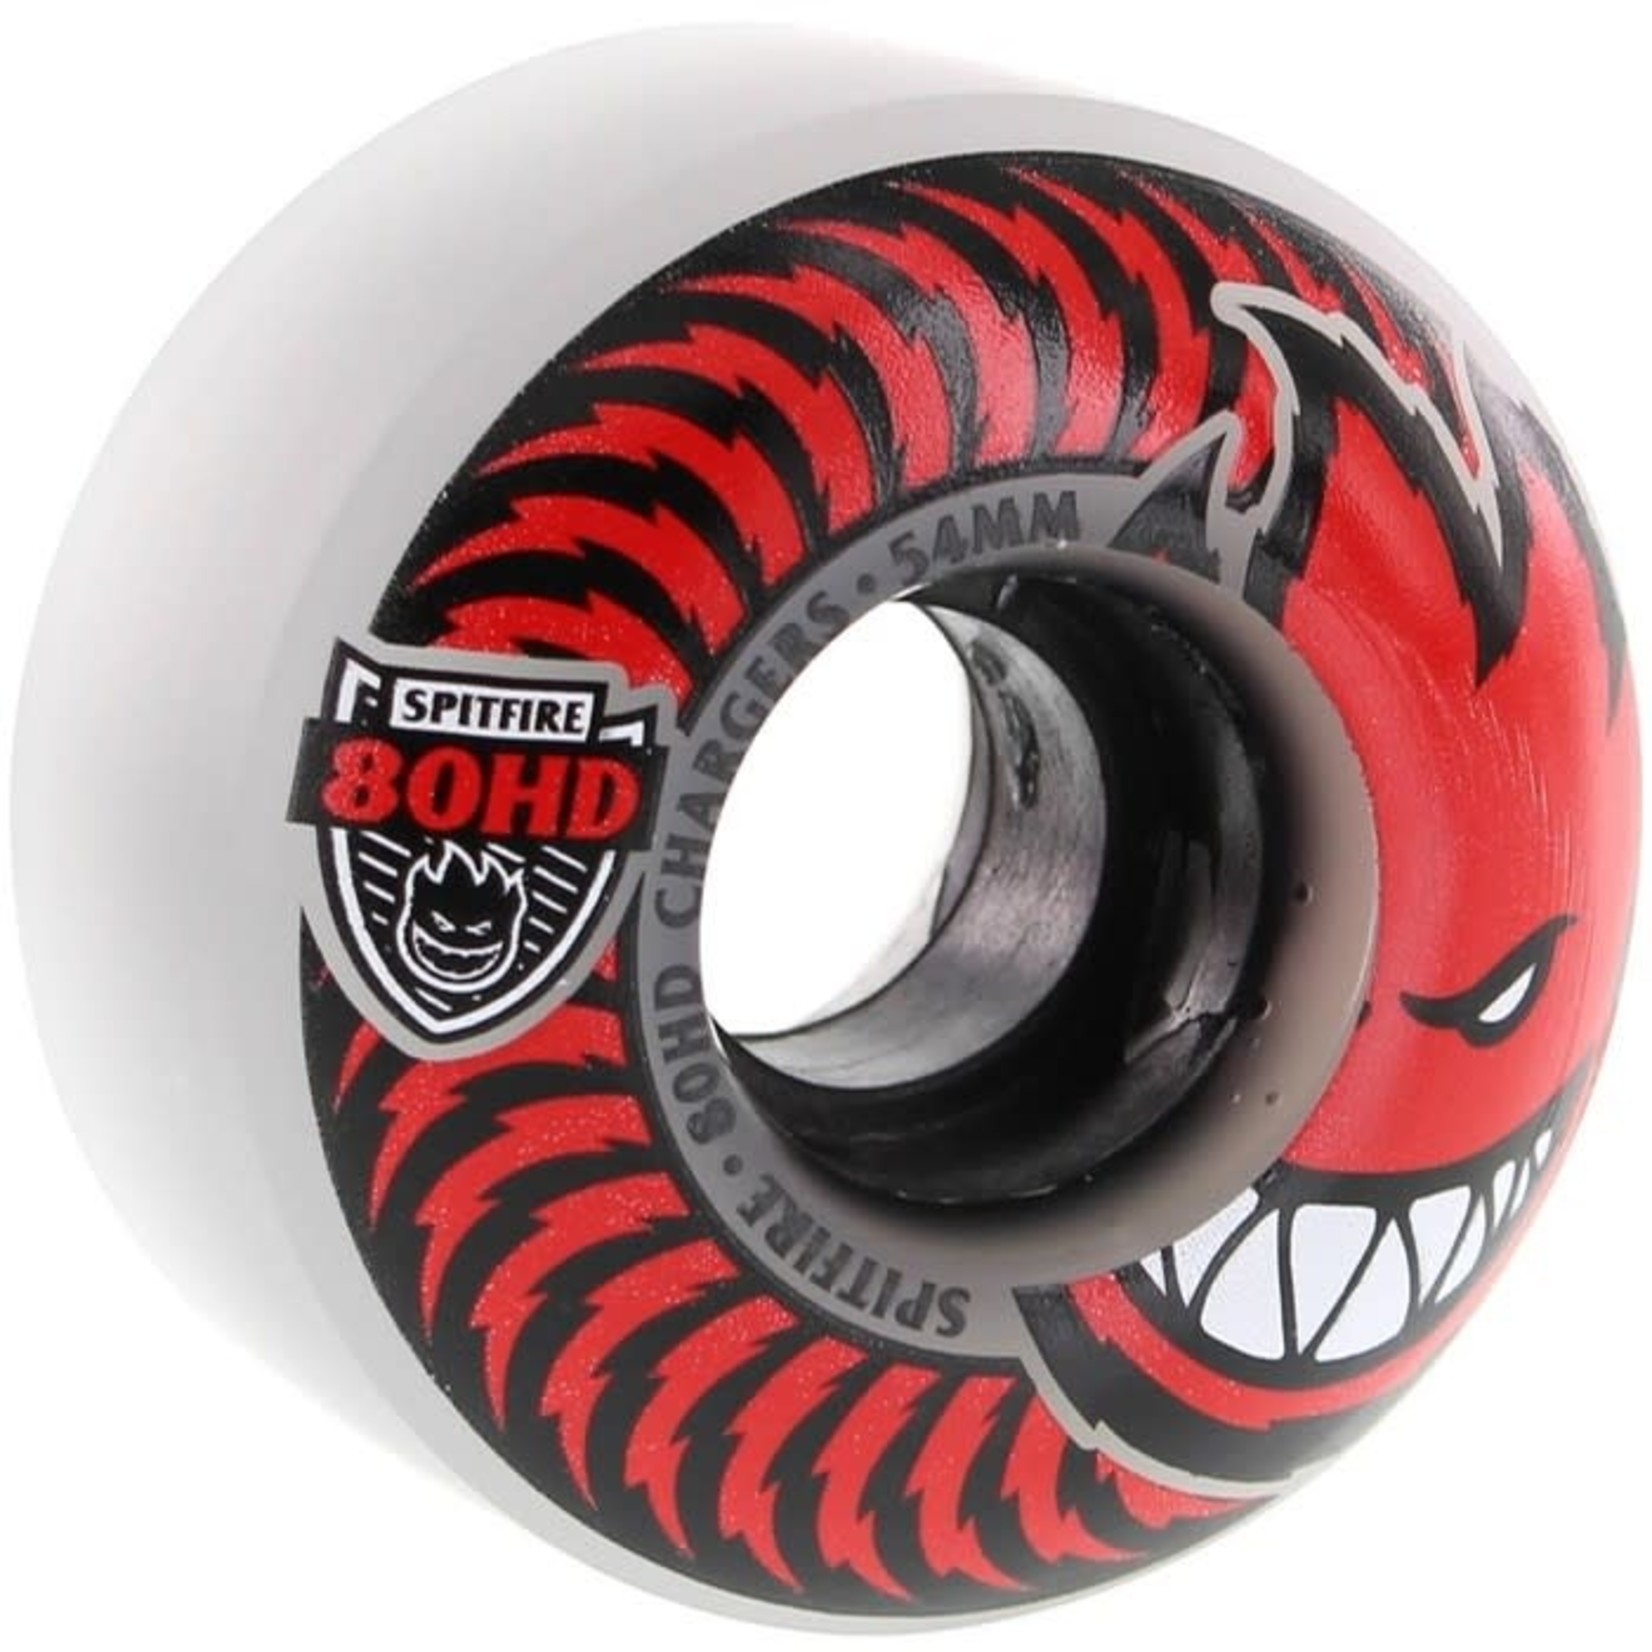 Spitfire Wheels Spitfire 80HD Charger Classic Full Wheels 54mm